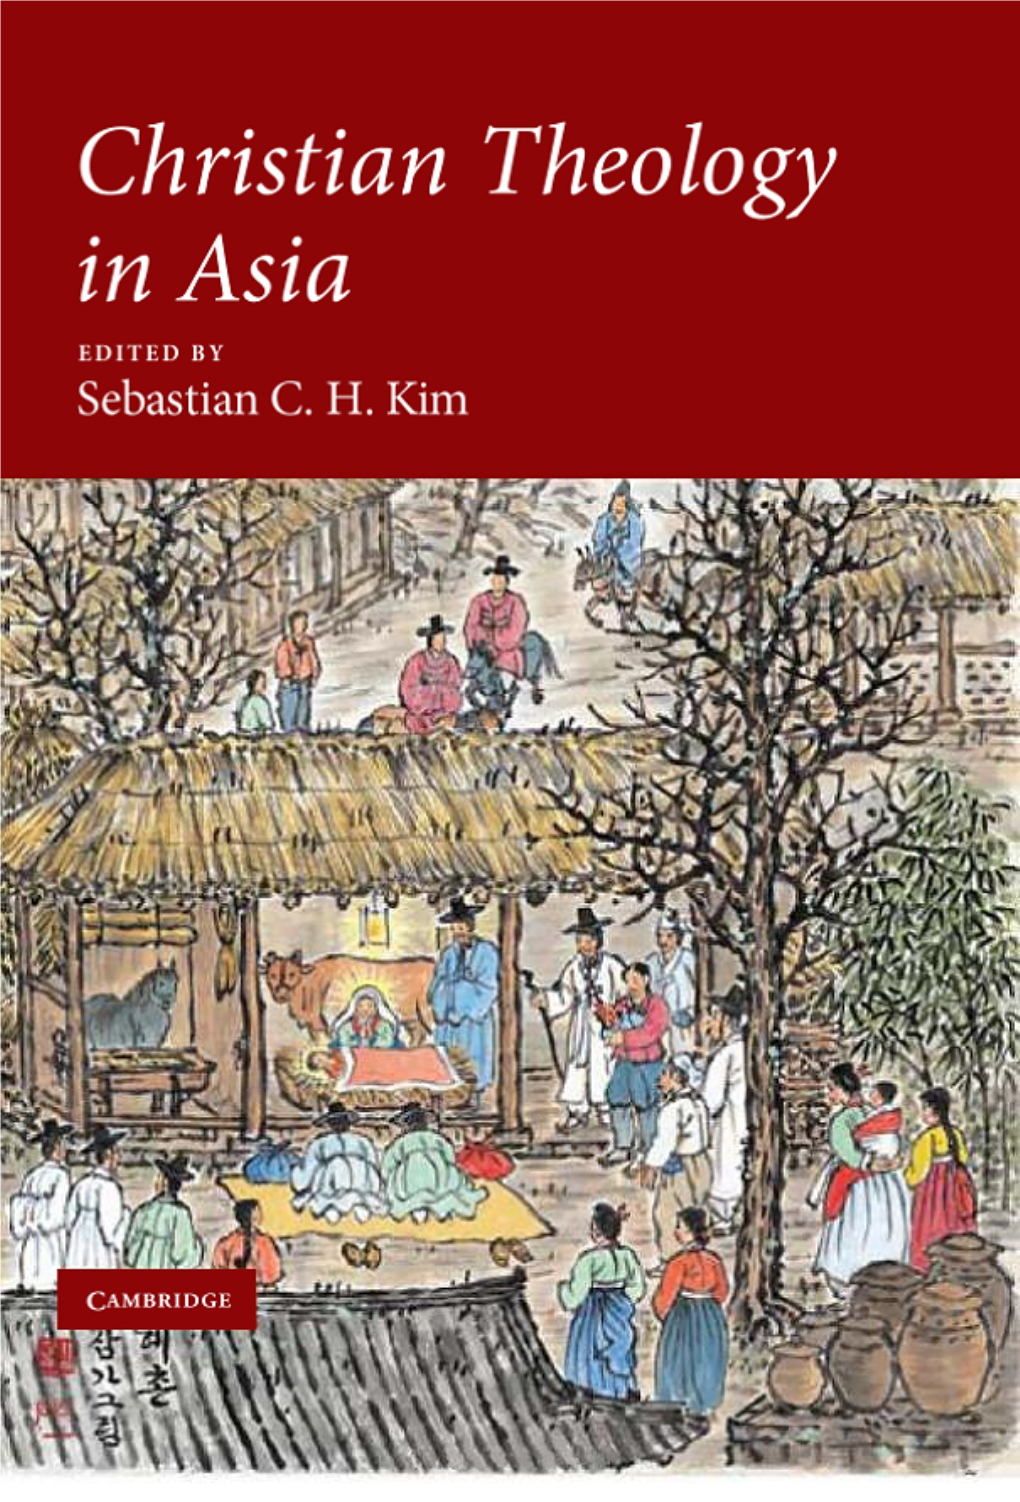 Christian Theology in Asia